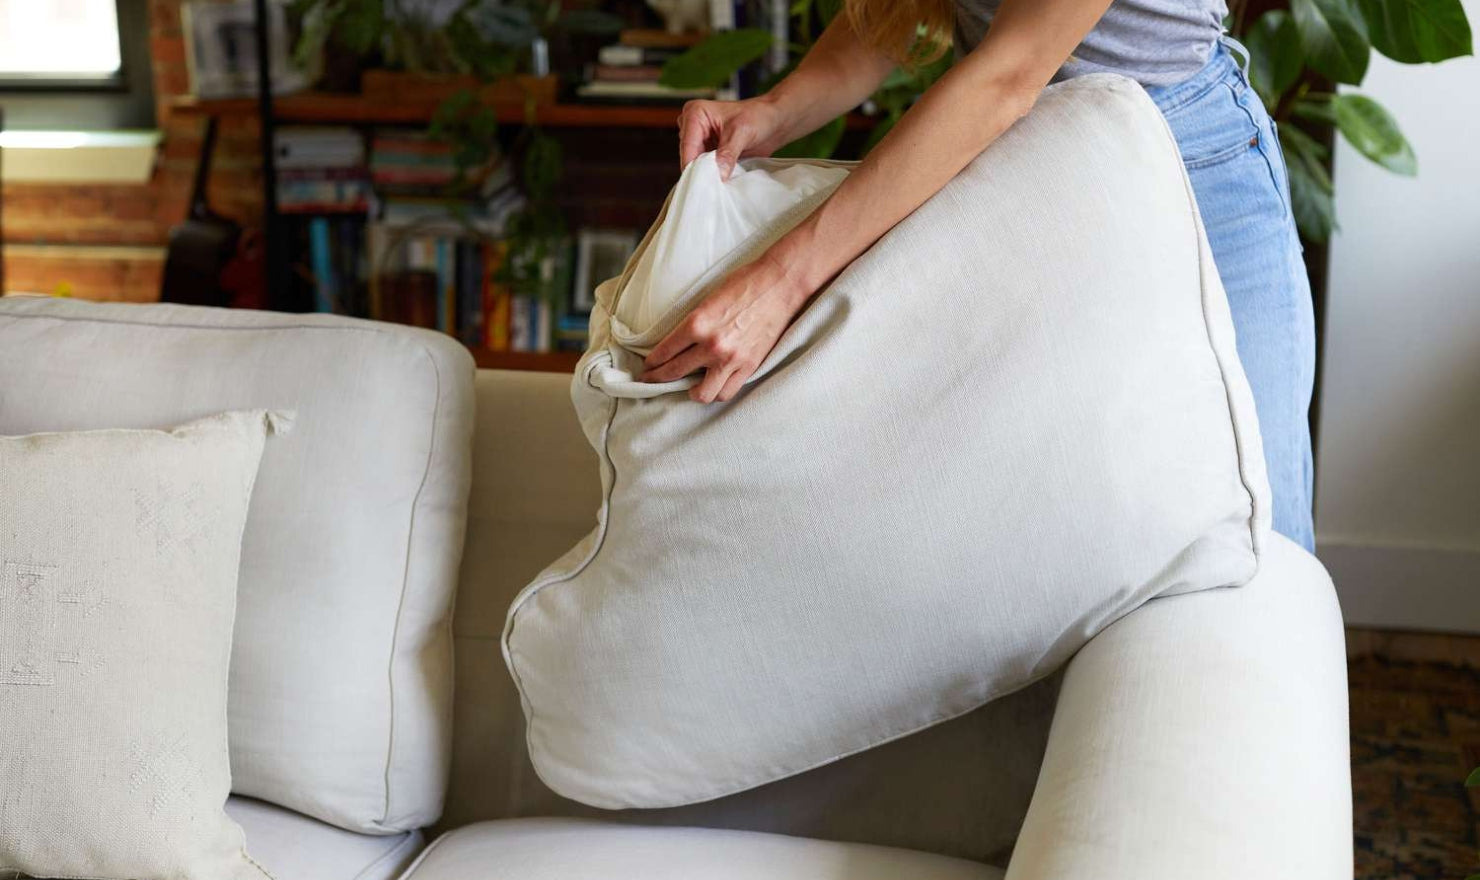 TIPS TO TAKE APART A SLEEPER SOFA FOR MOVING - Start by removing the cushions